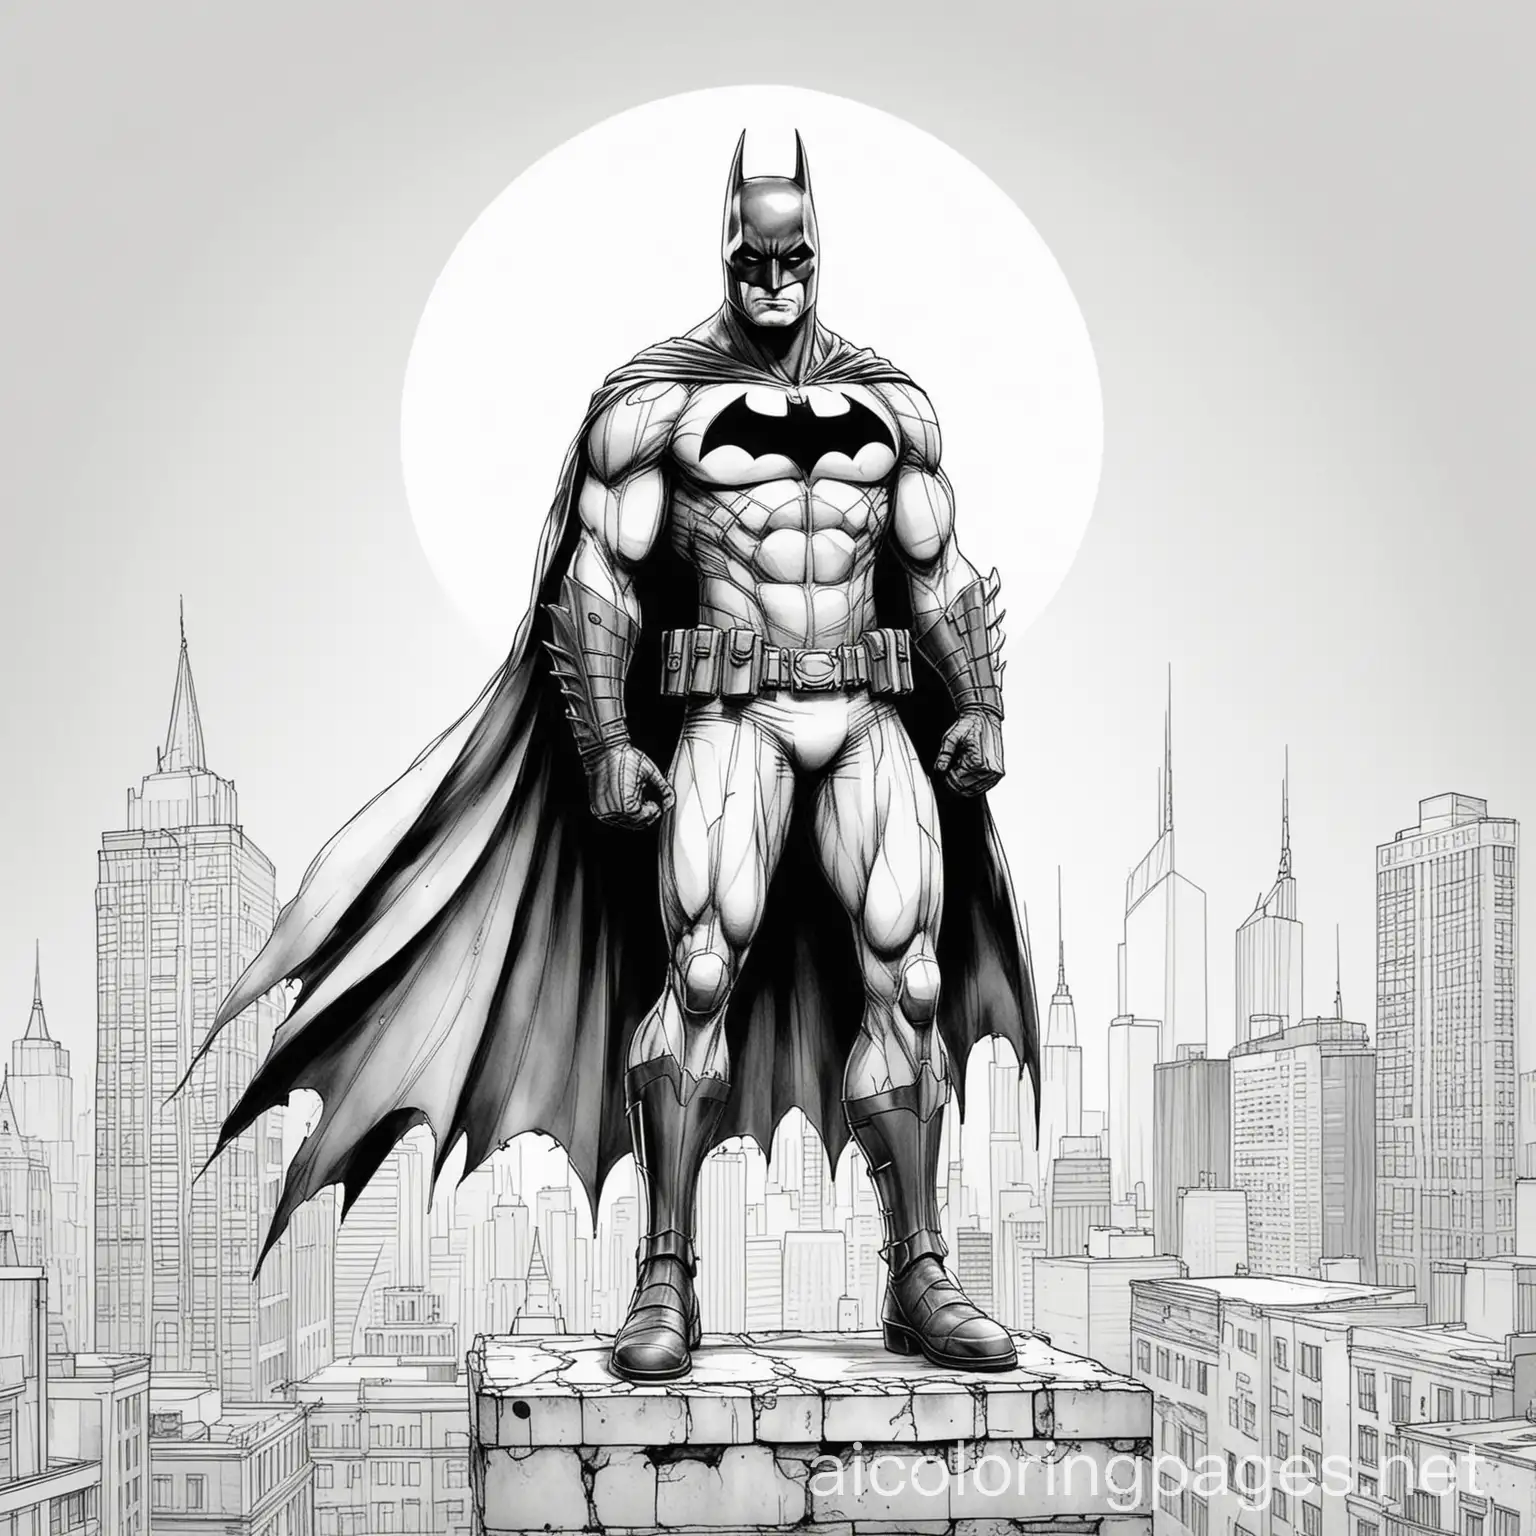 Batman-Coloring-Page-Superhero-Standing-on-Building-Black-and-White